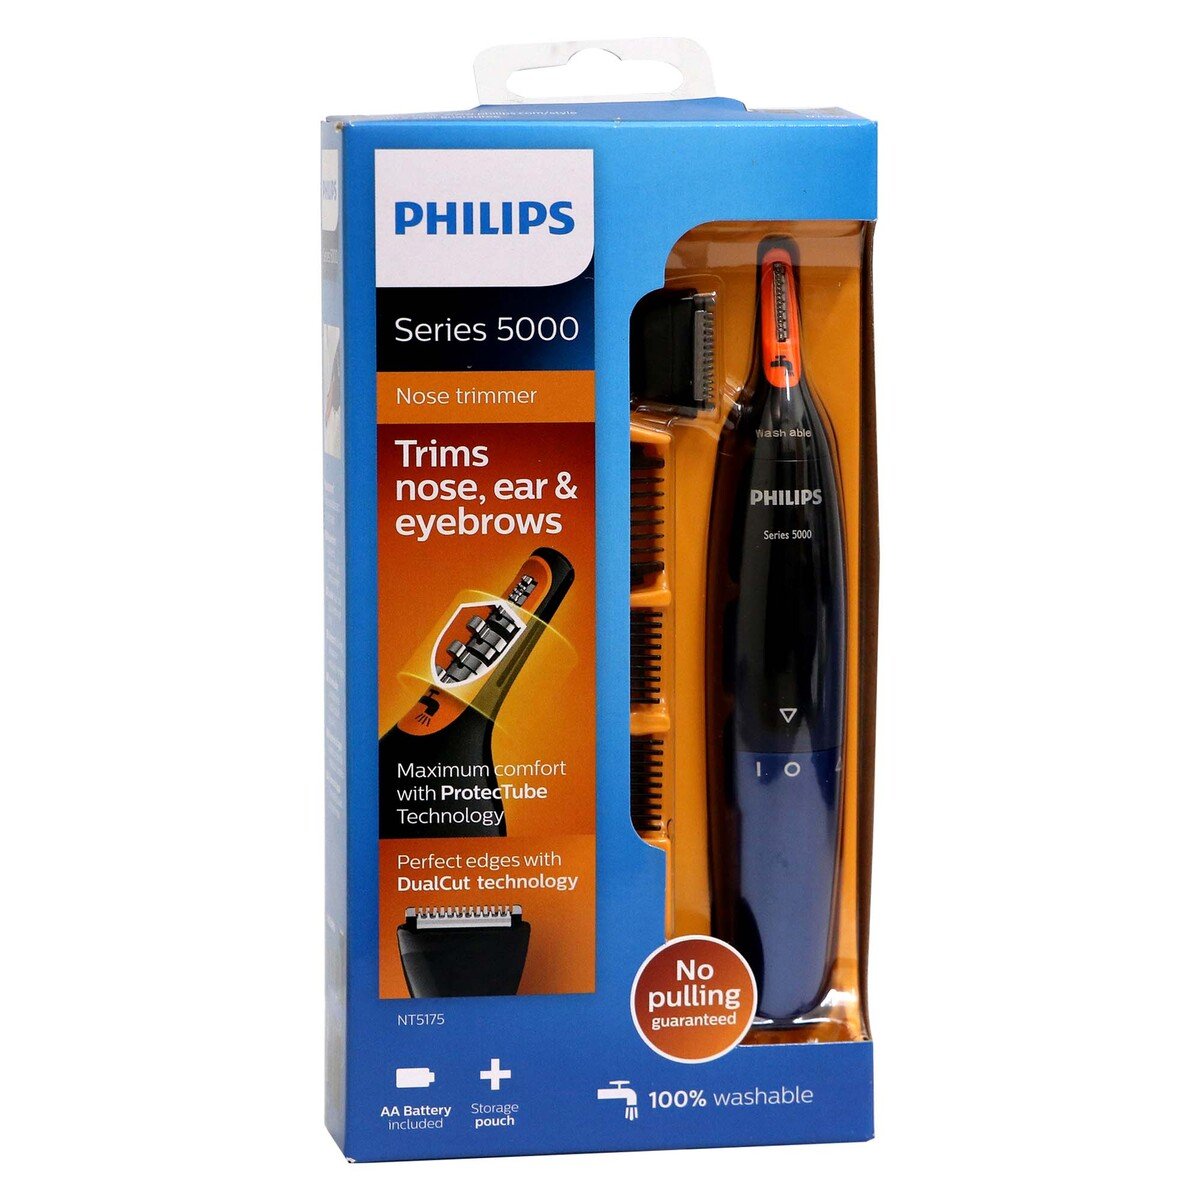 Philips Nose Trimmer NT-5175